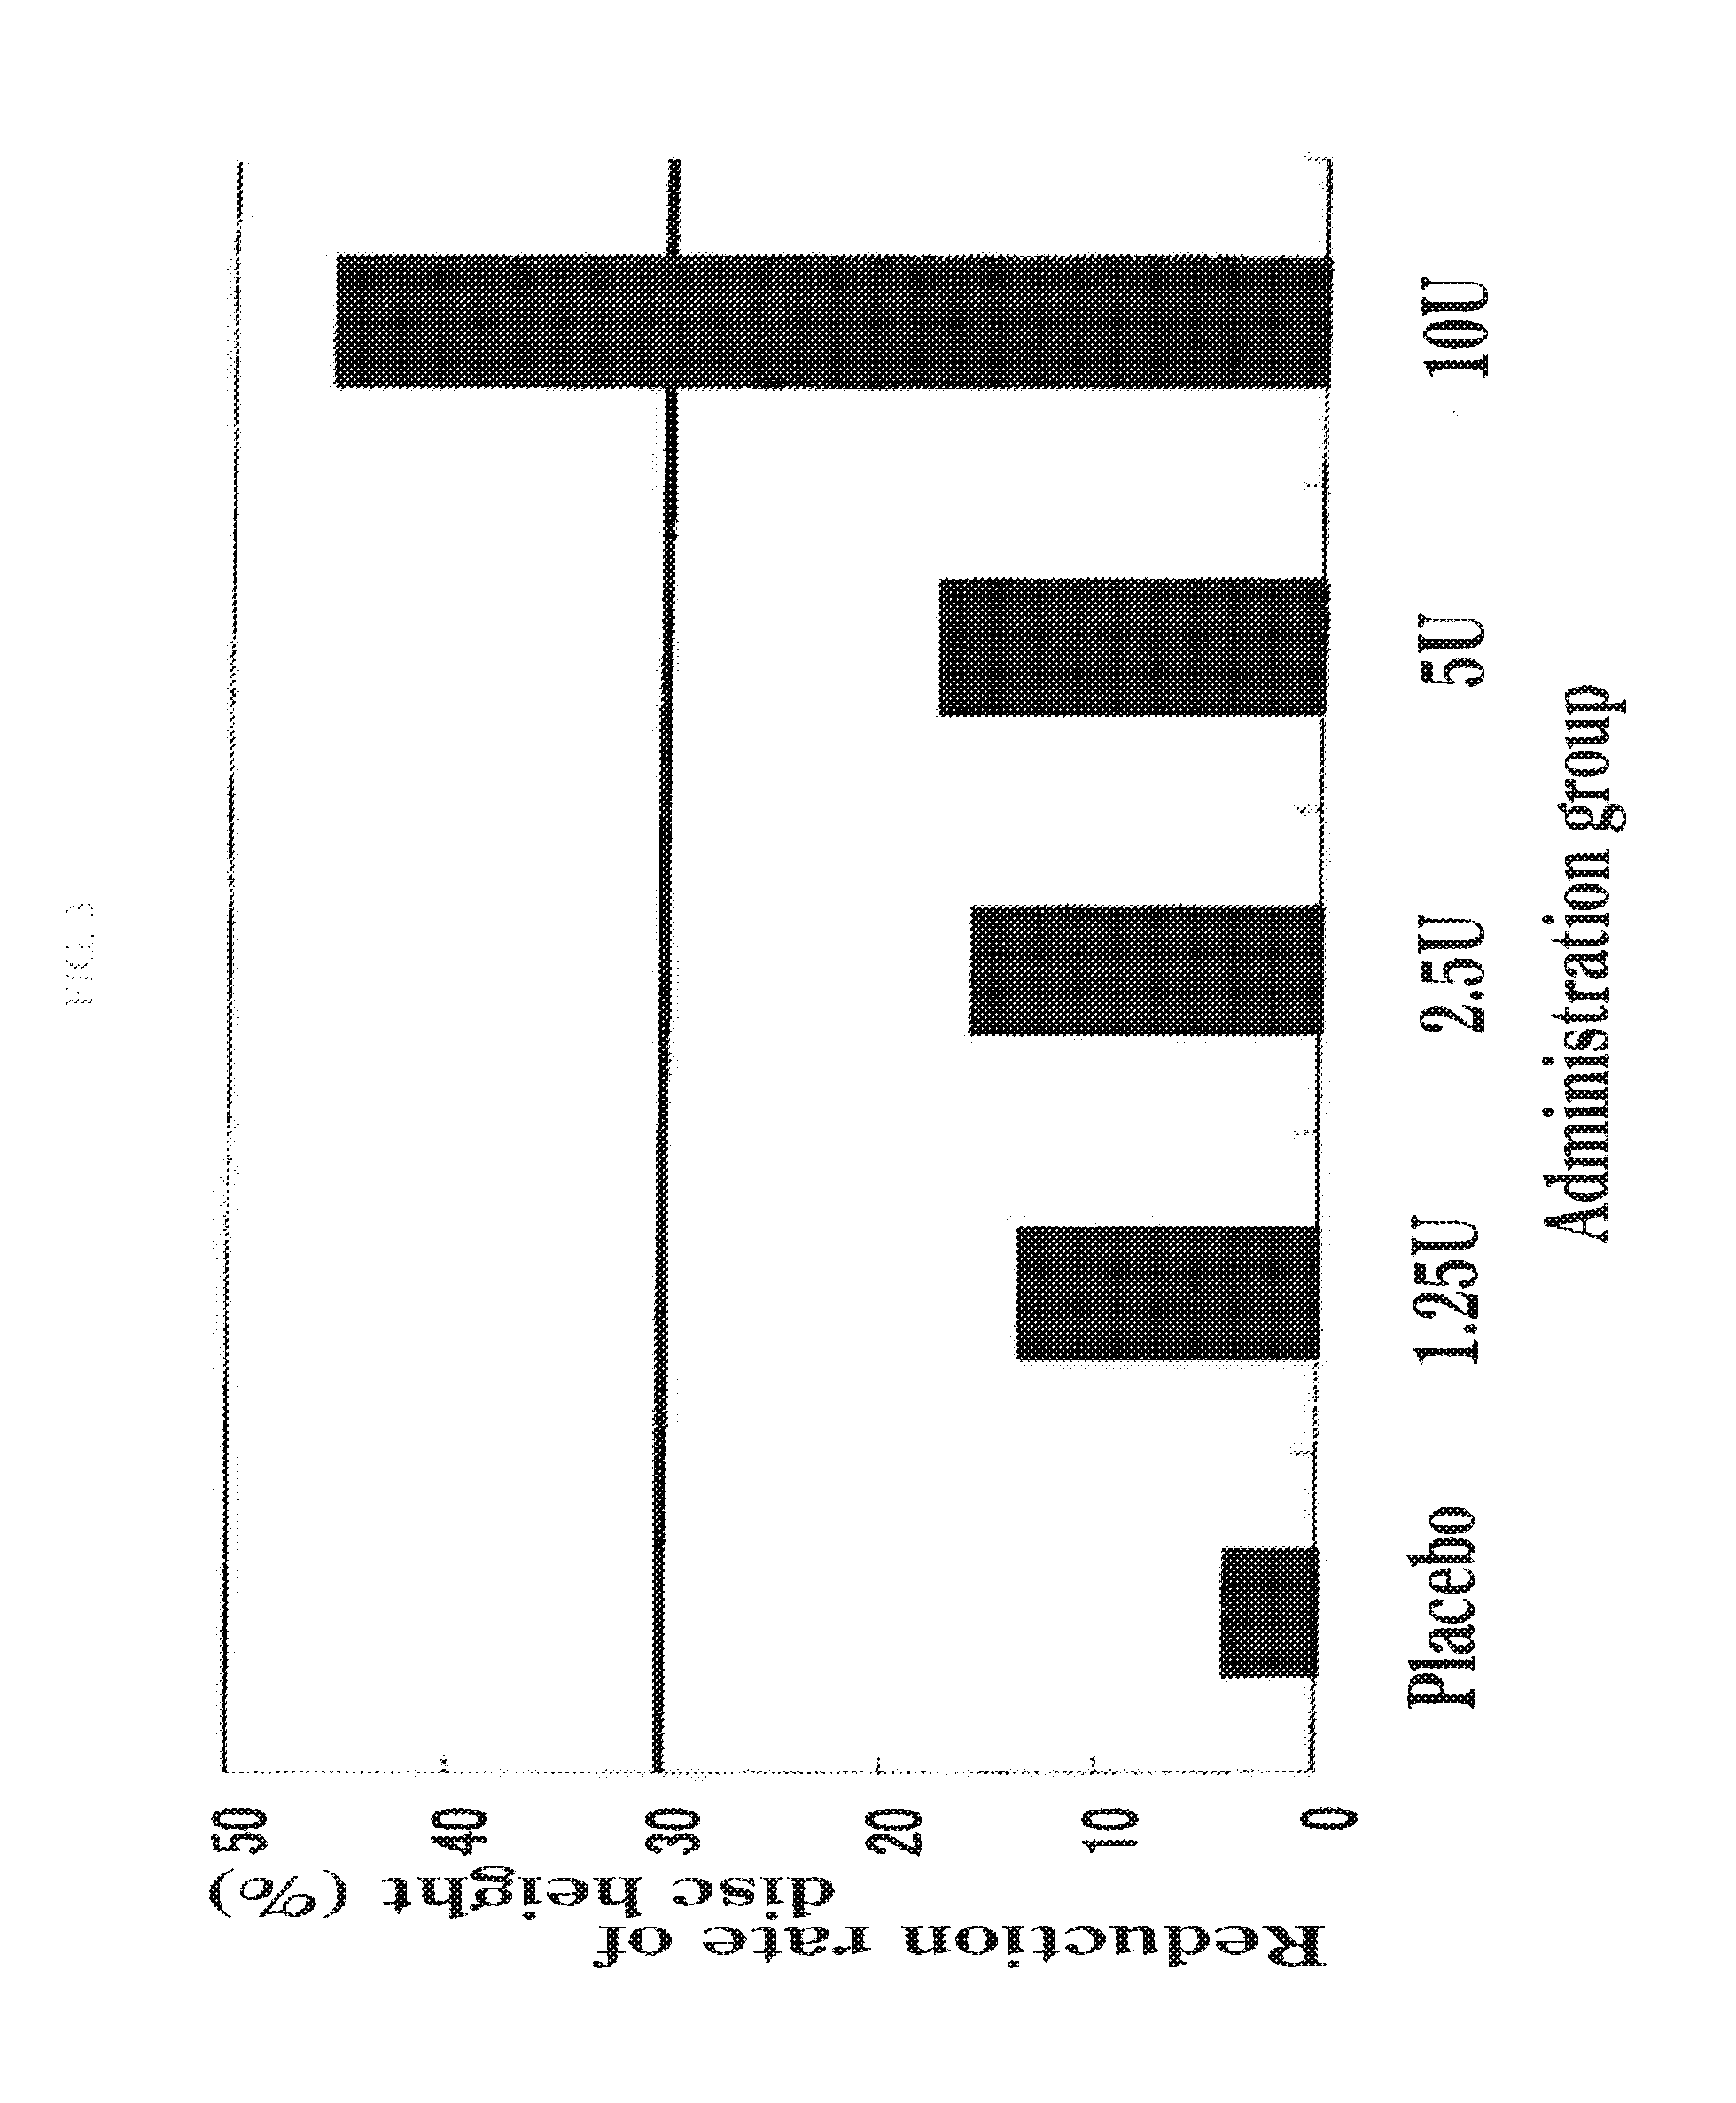 Therapeutic agent for disc herniation